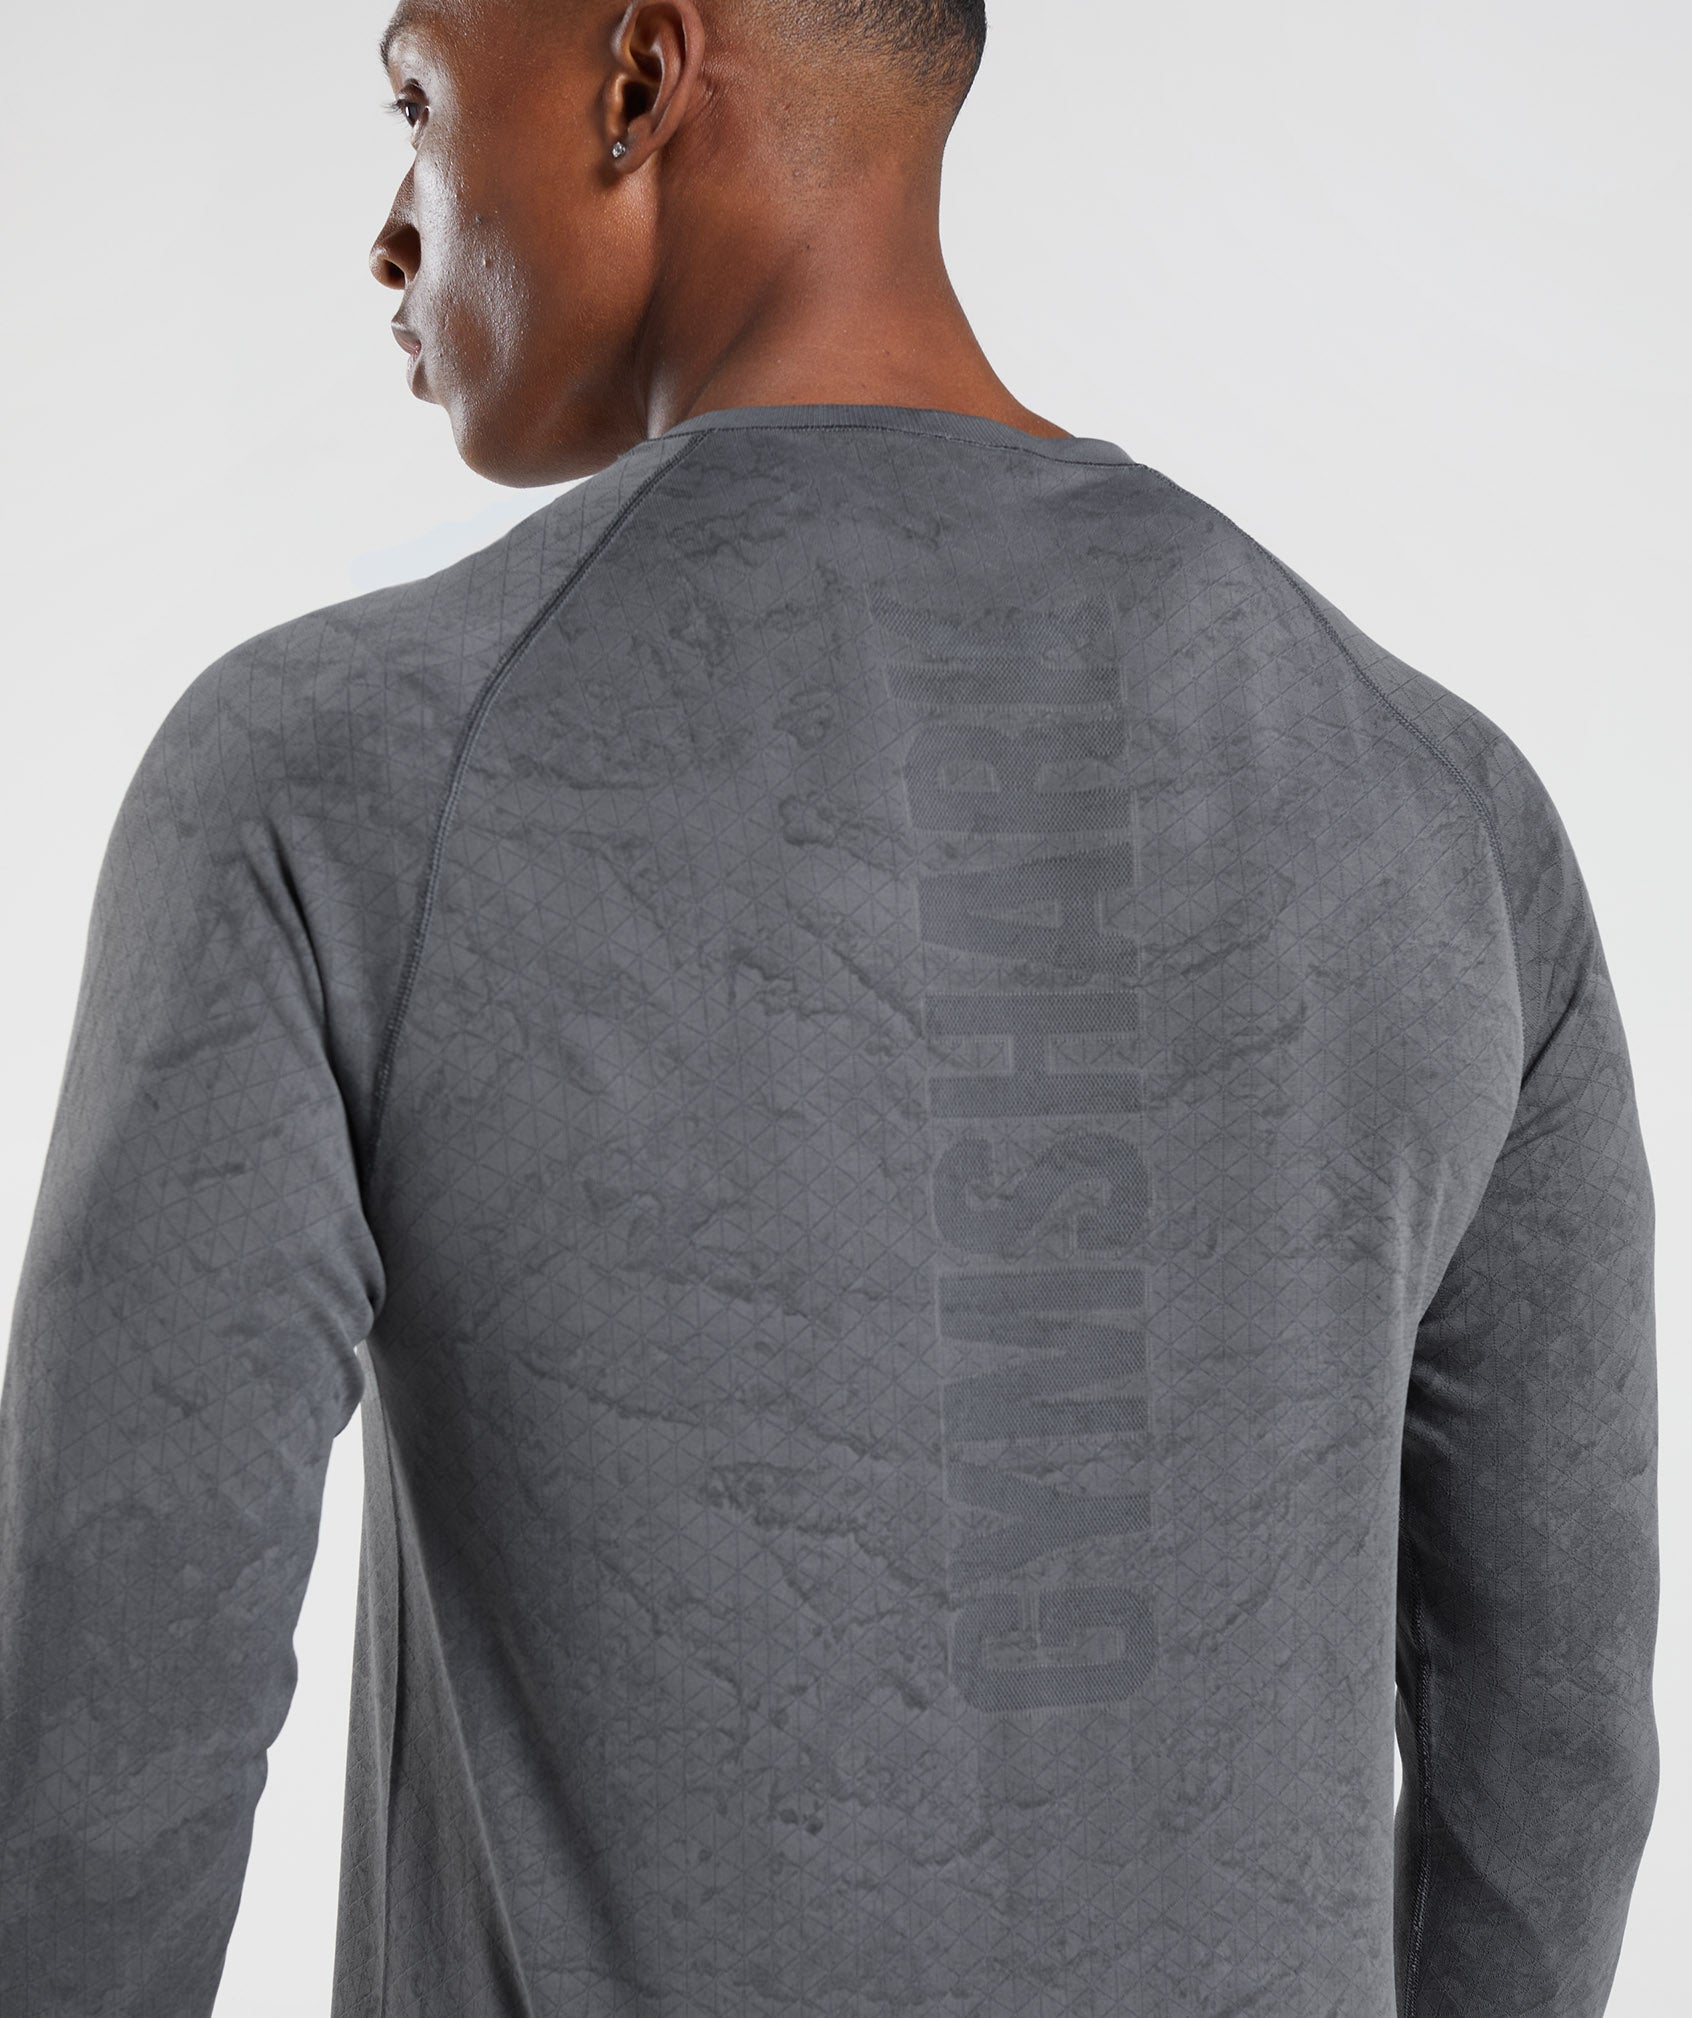 Geo Seamless Long Sleeve T-Shirt in Charcoal Grey/Black - view 5